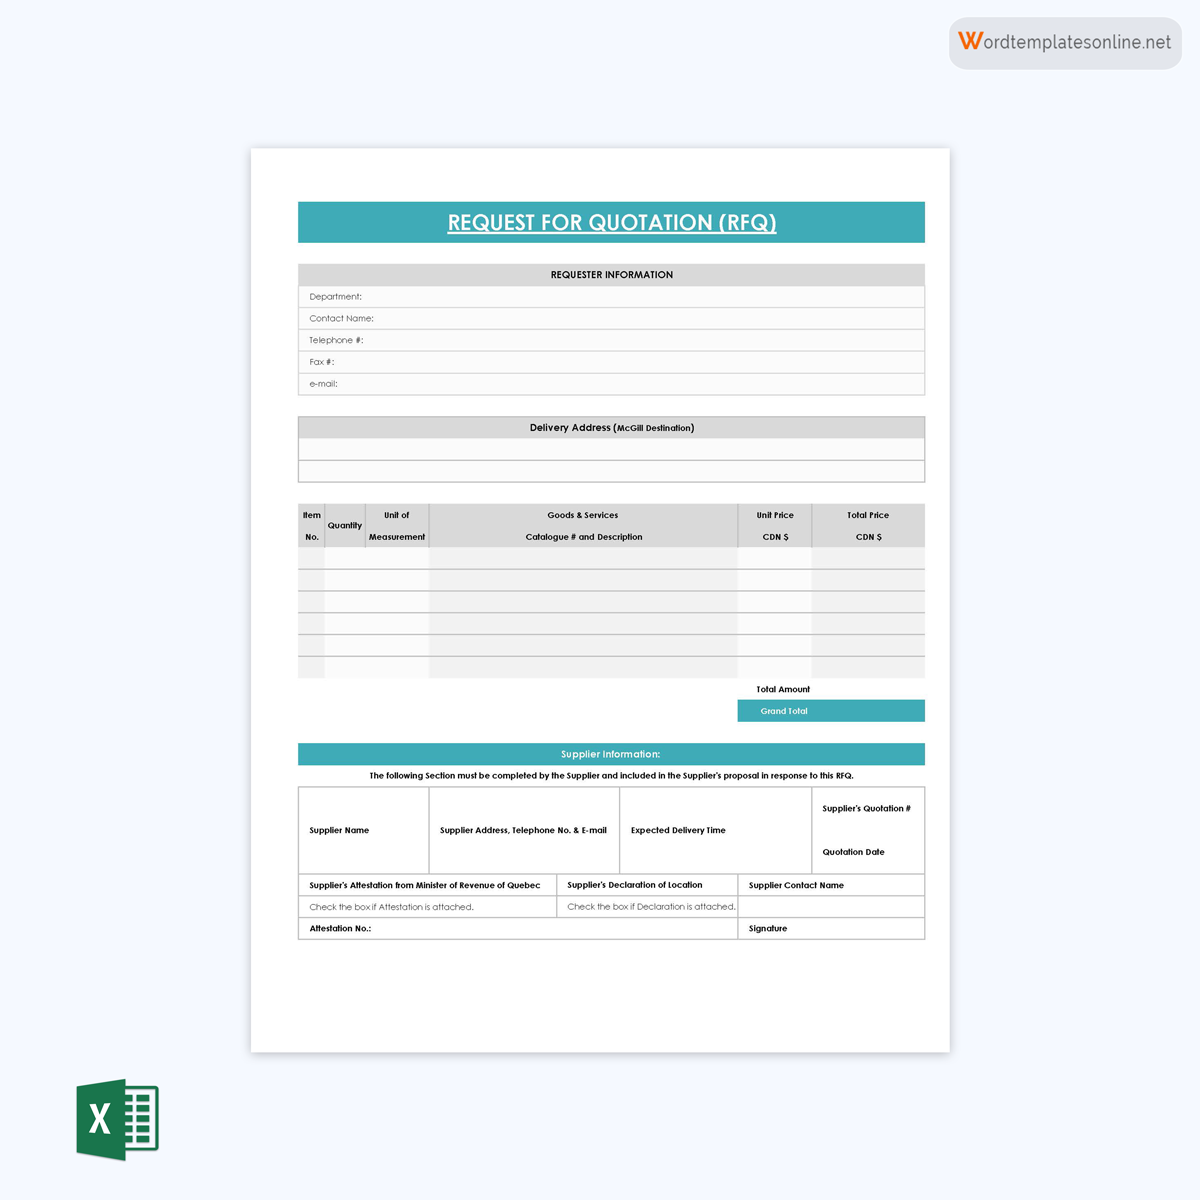 Request for Quote Form - Free Printable Template